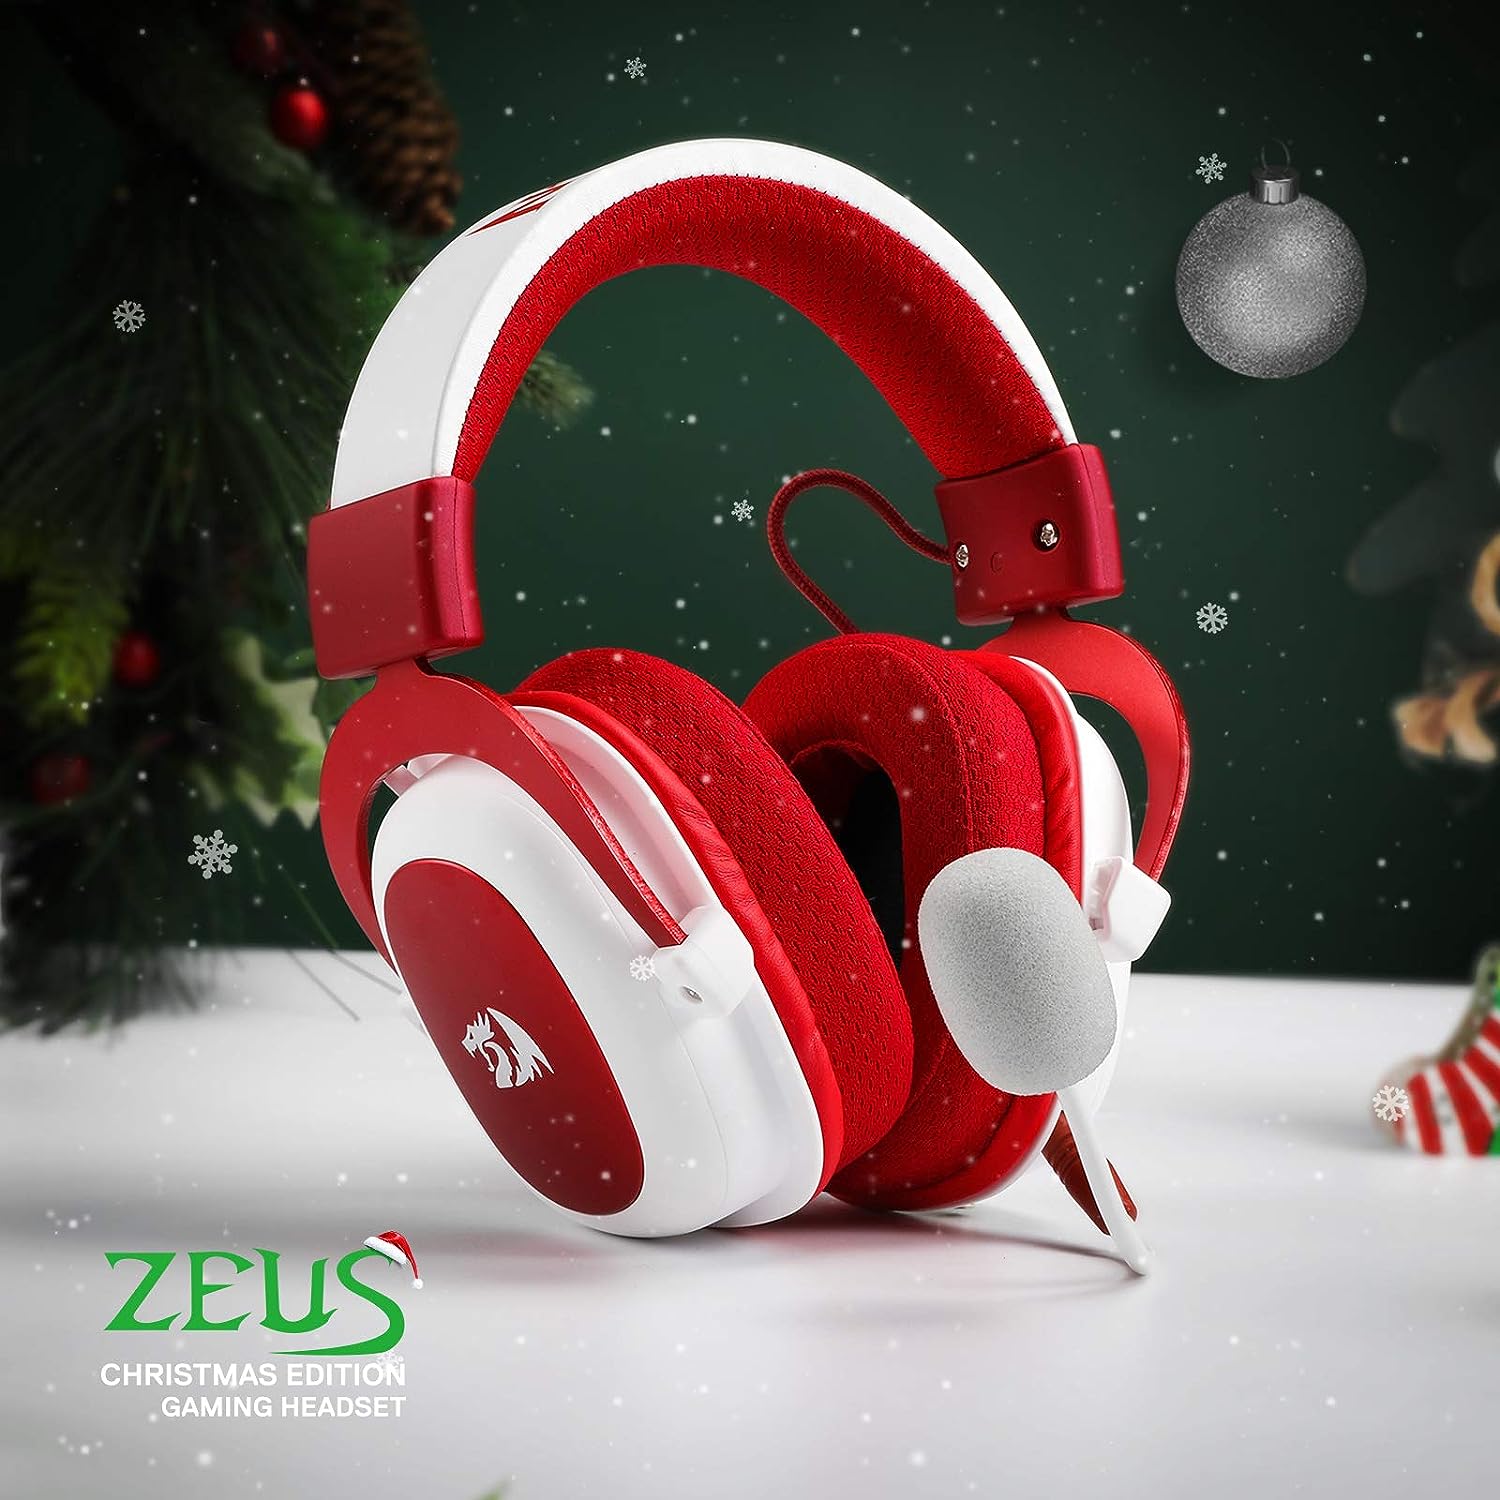 Redragon H510-Xmas Zeus 2 Wired Gaming Headset - 7.1 Surround Sound - Breathable Fabric Cushion Cover - 53MM Drivers - Detachable Mic - Headphone for PC, PS4/3, Xbox One/Series X, NS, Christmas Edition